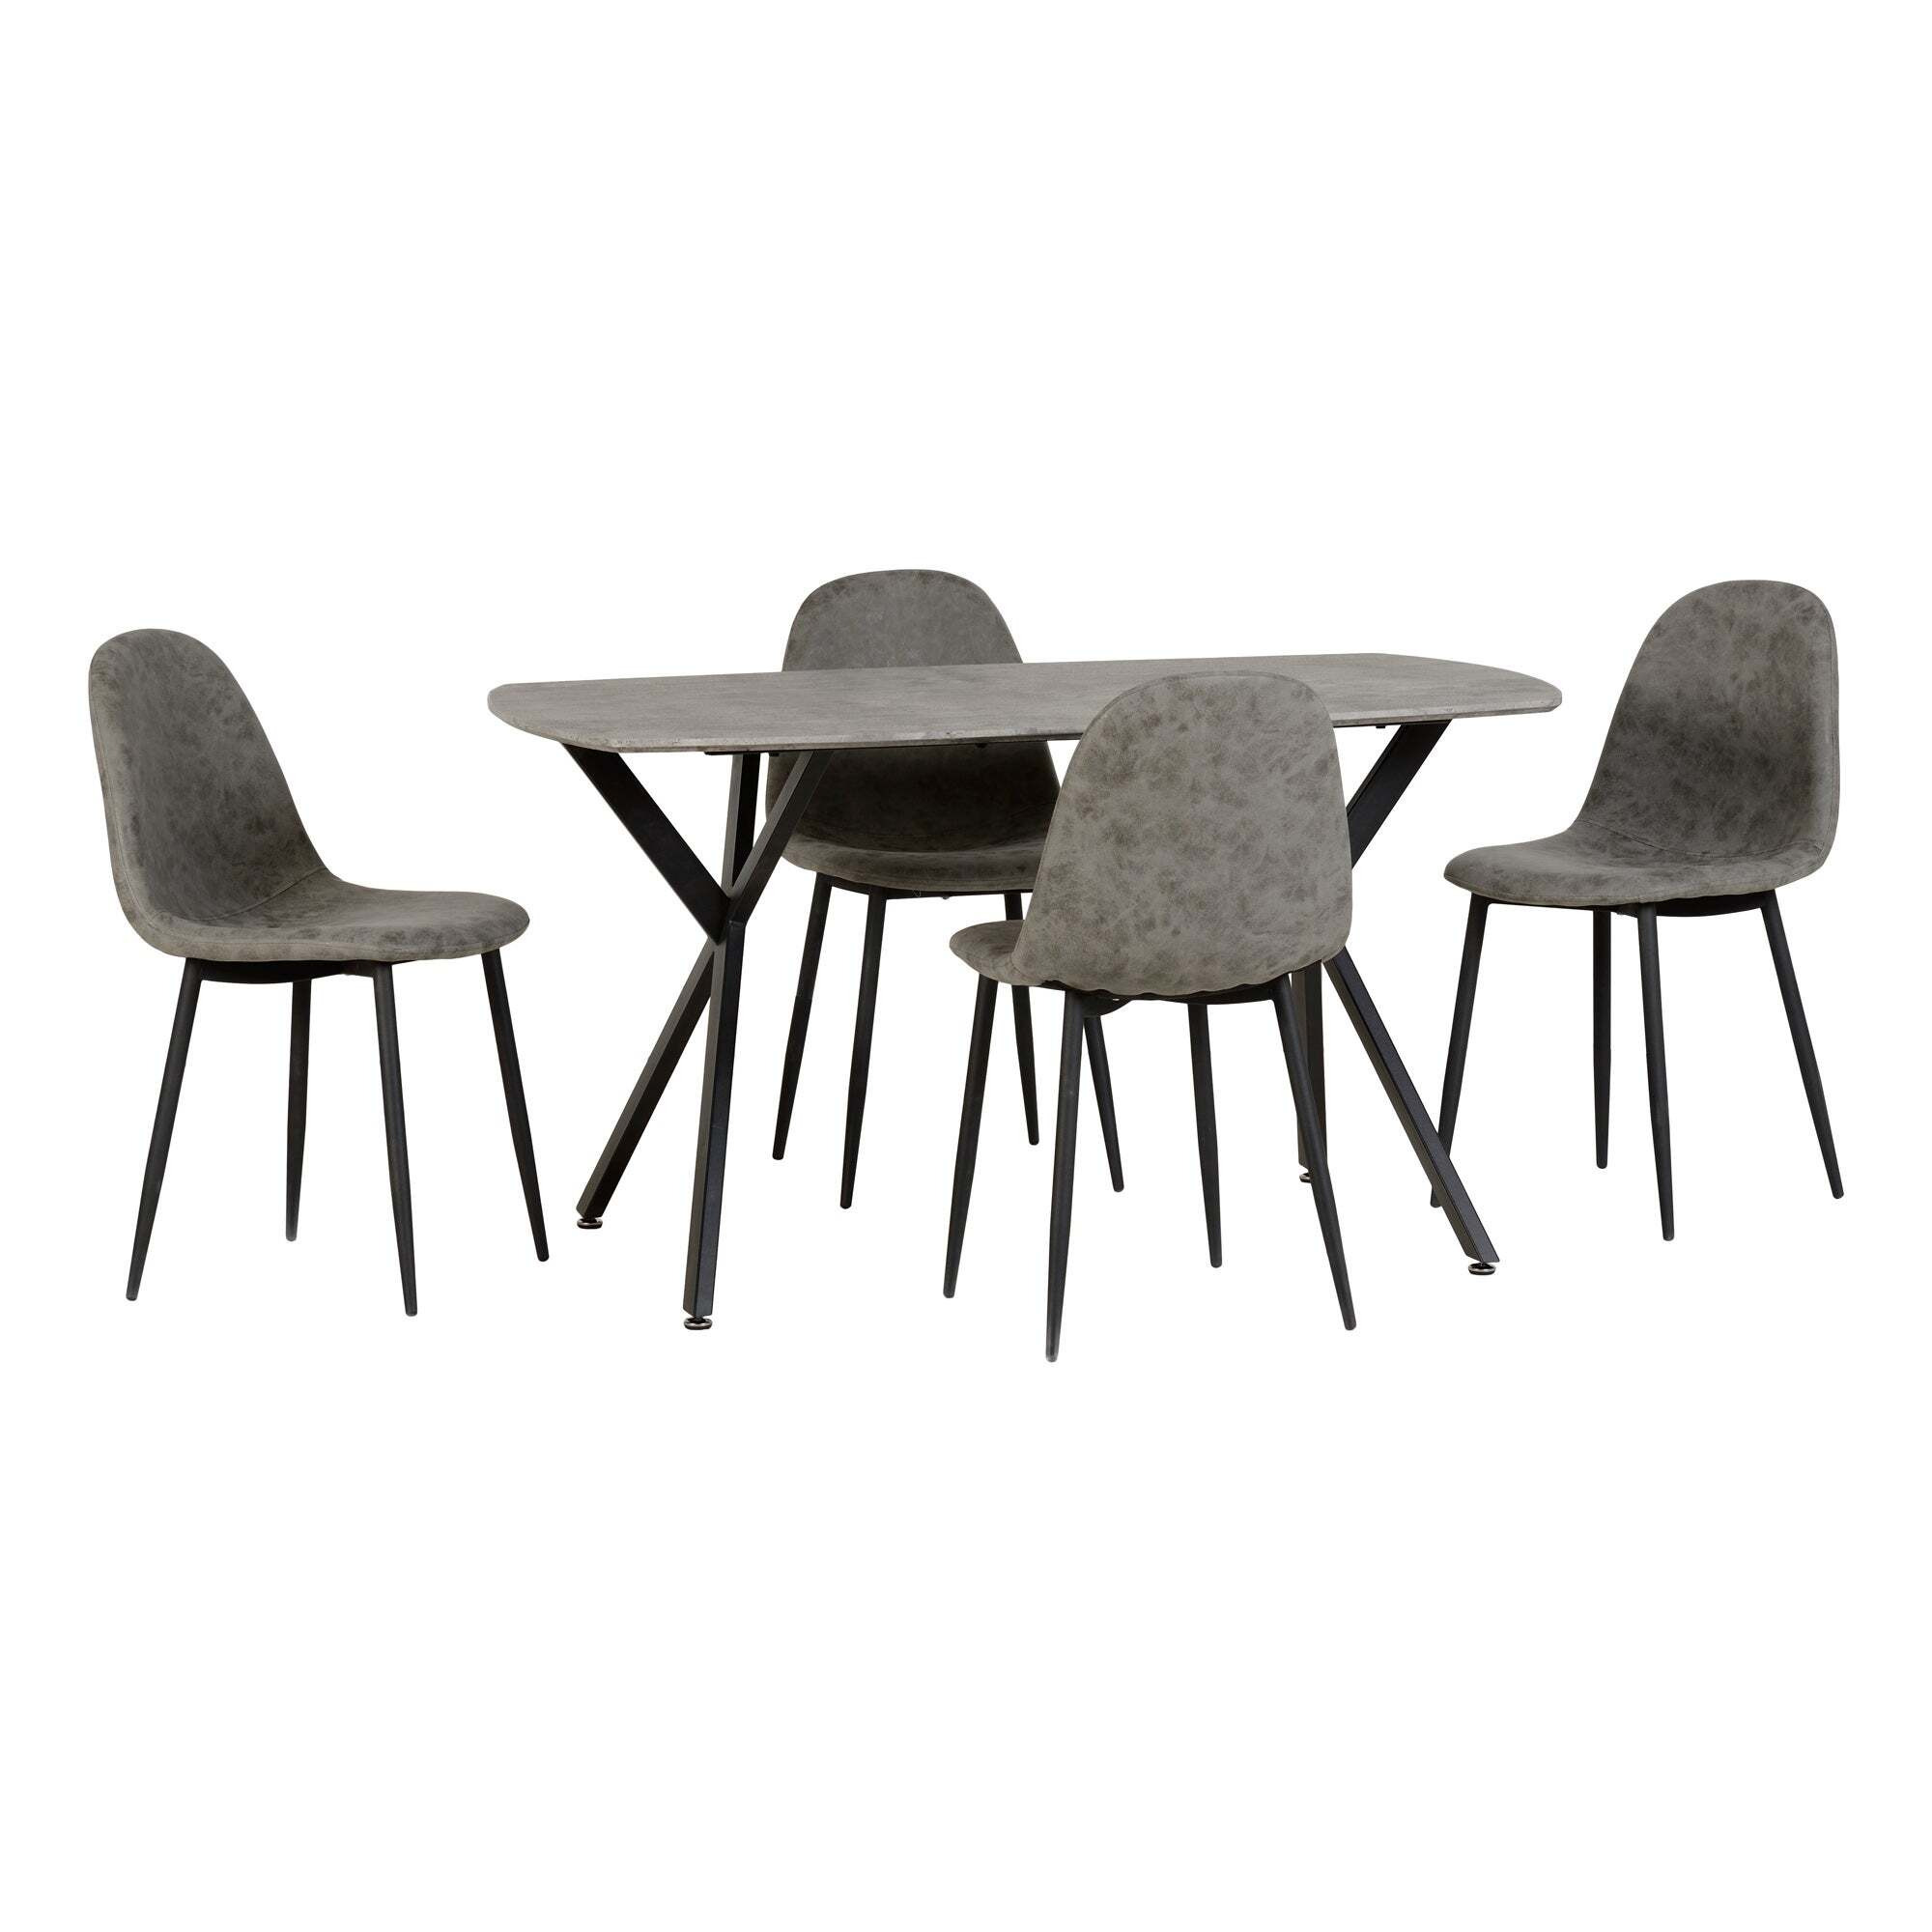 Athens Rectangular Dining Table with 4 Chairs, Grey Grey